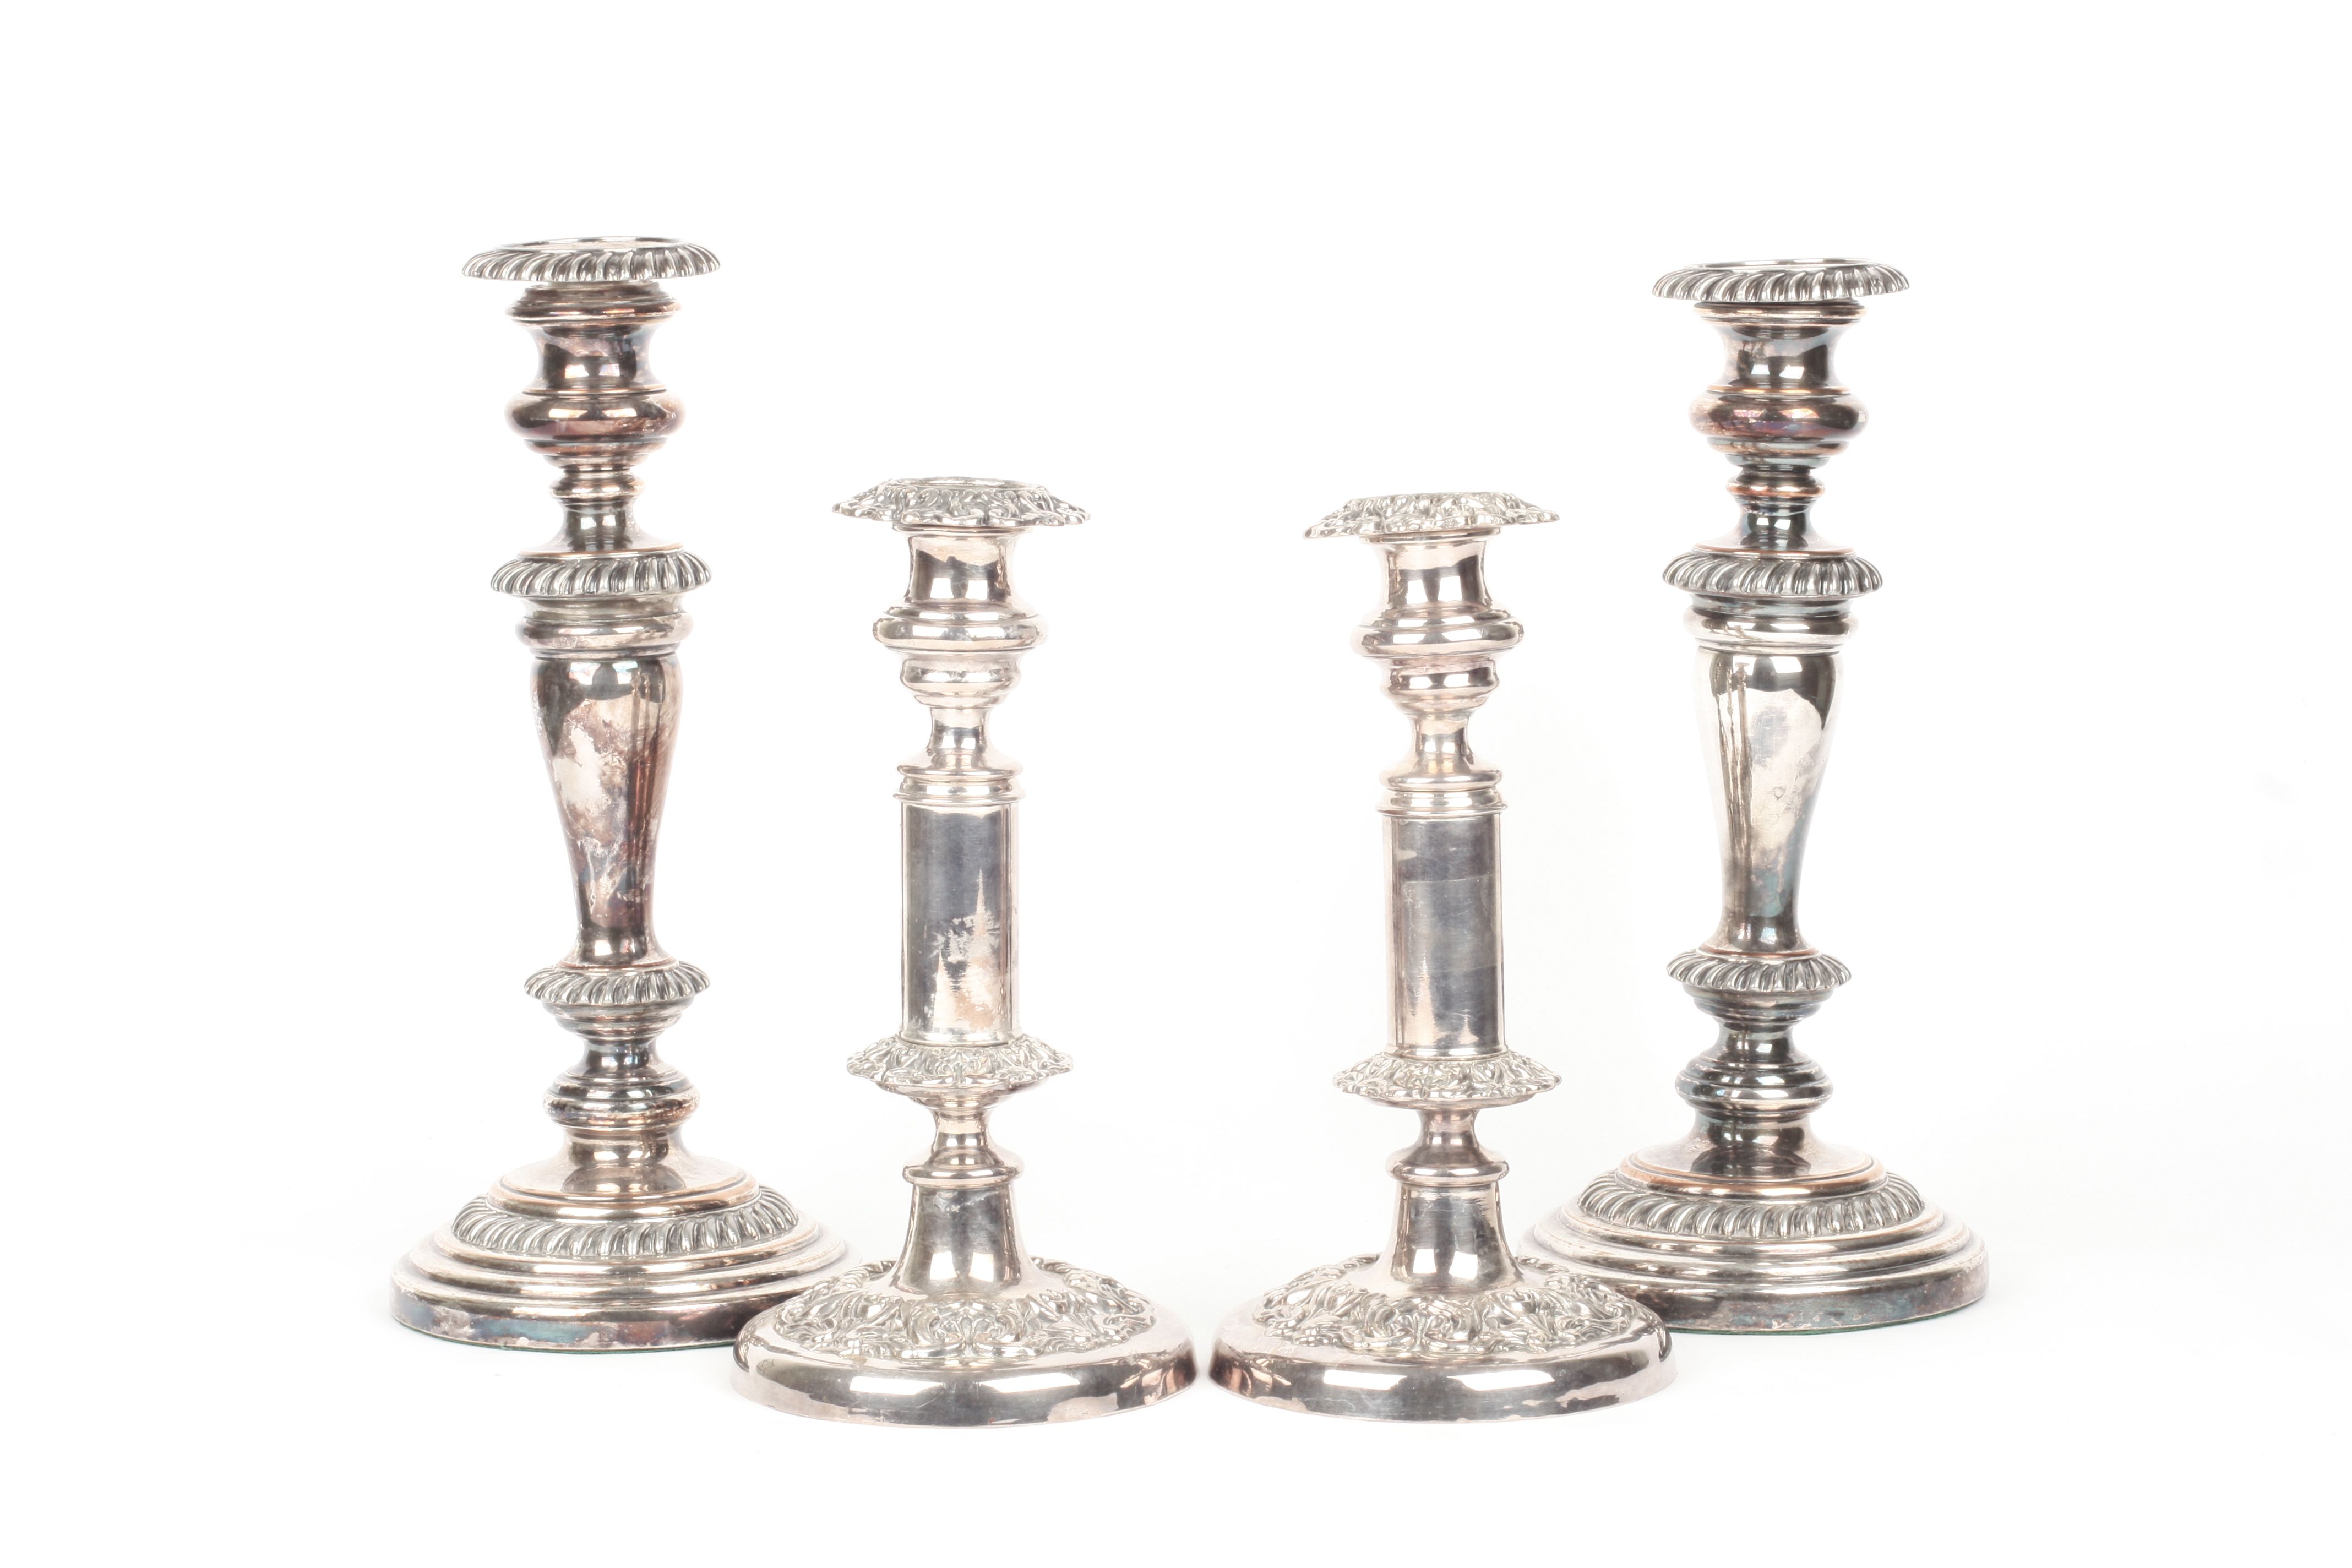 A pair of Victorian silver plated telescopic candlesticks, together with a pair of Old Sheffield